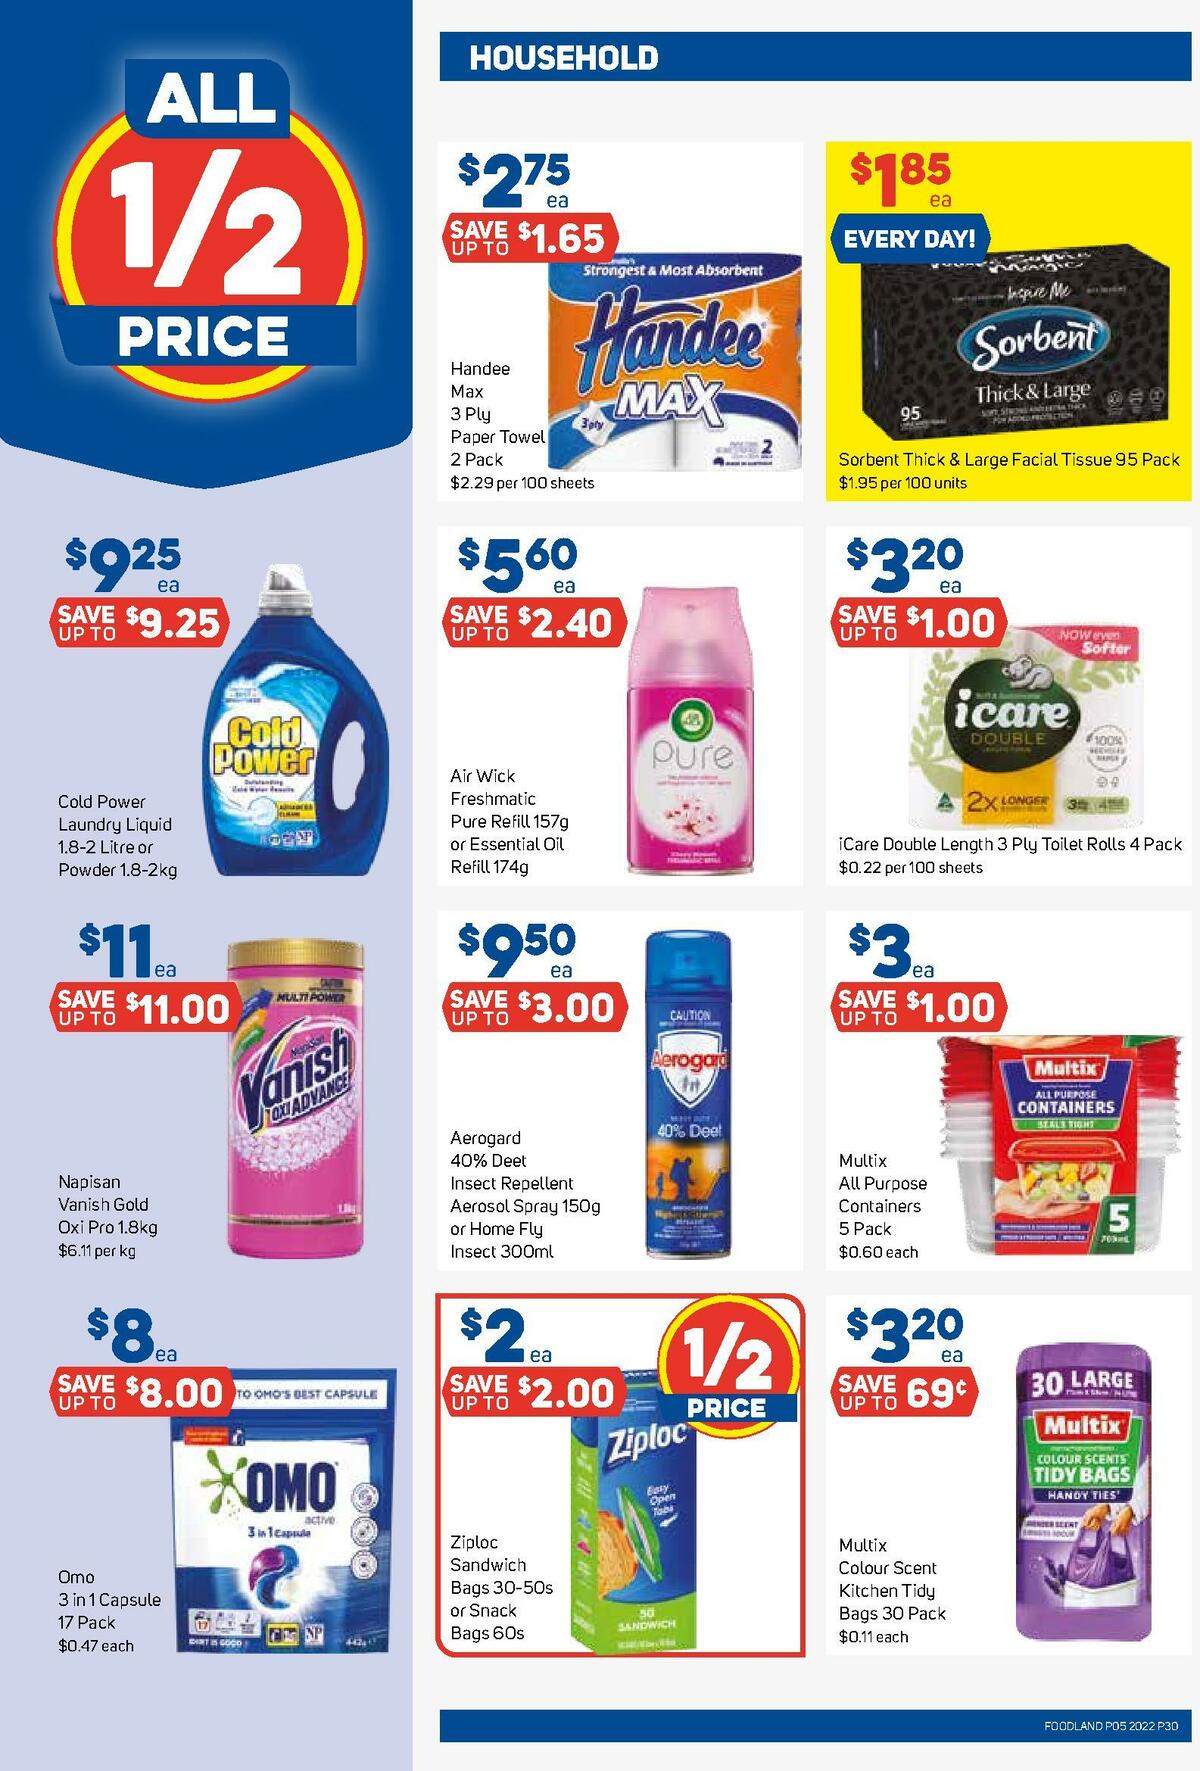 Foodland Catalogues from 2 February